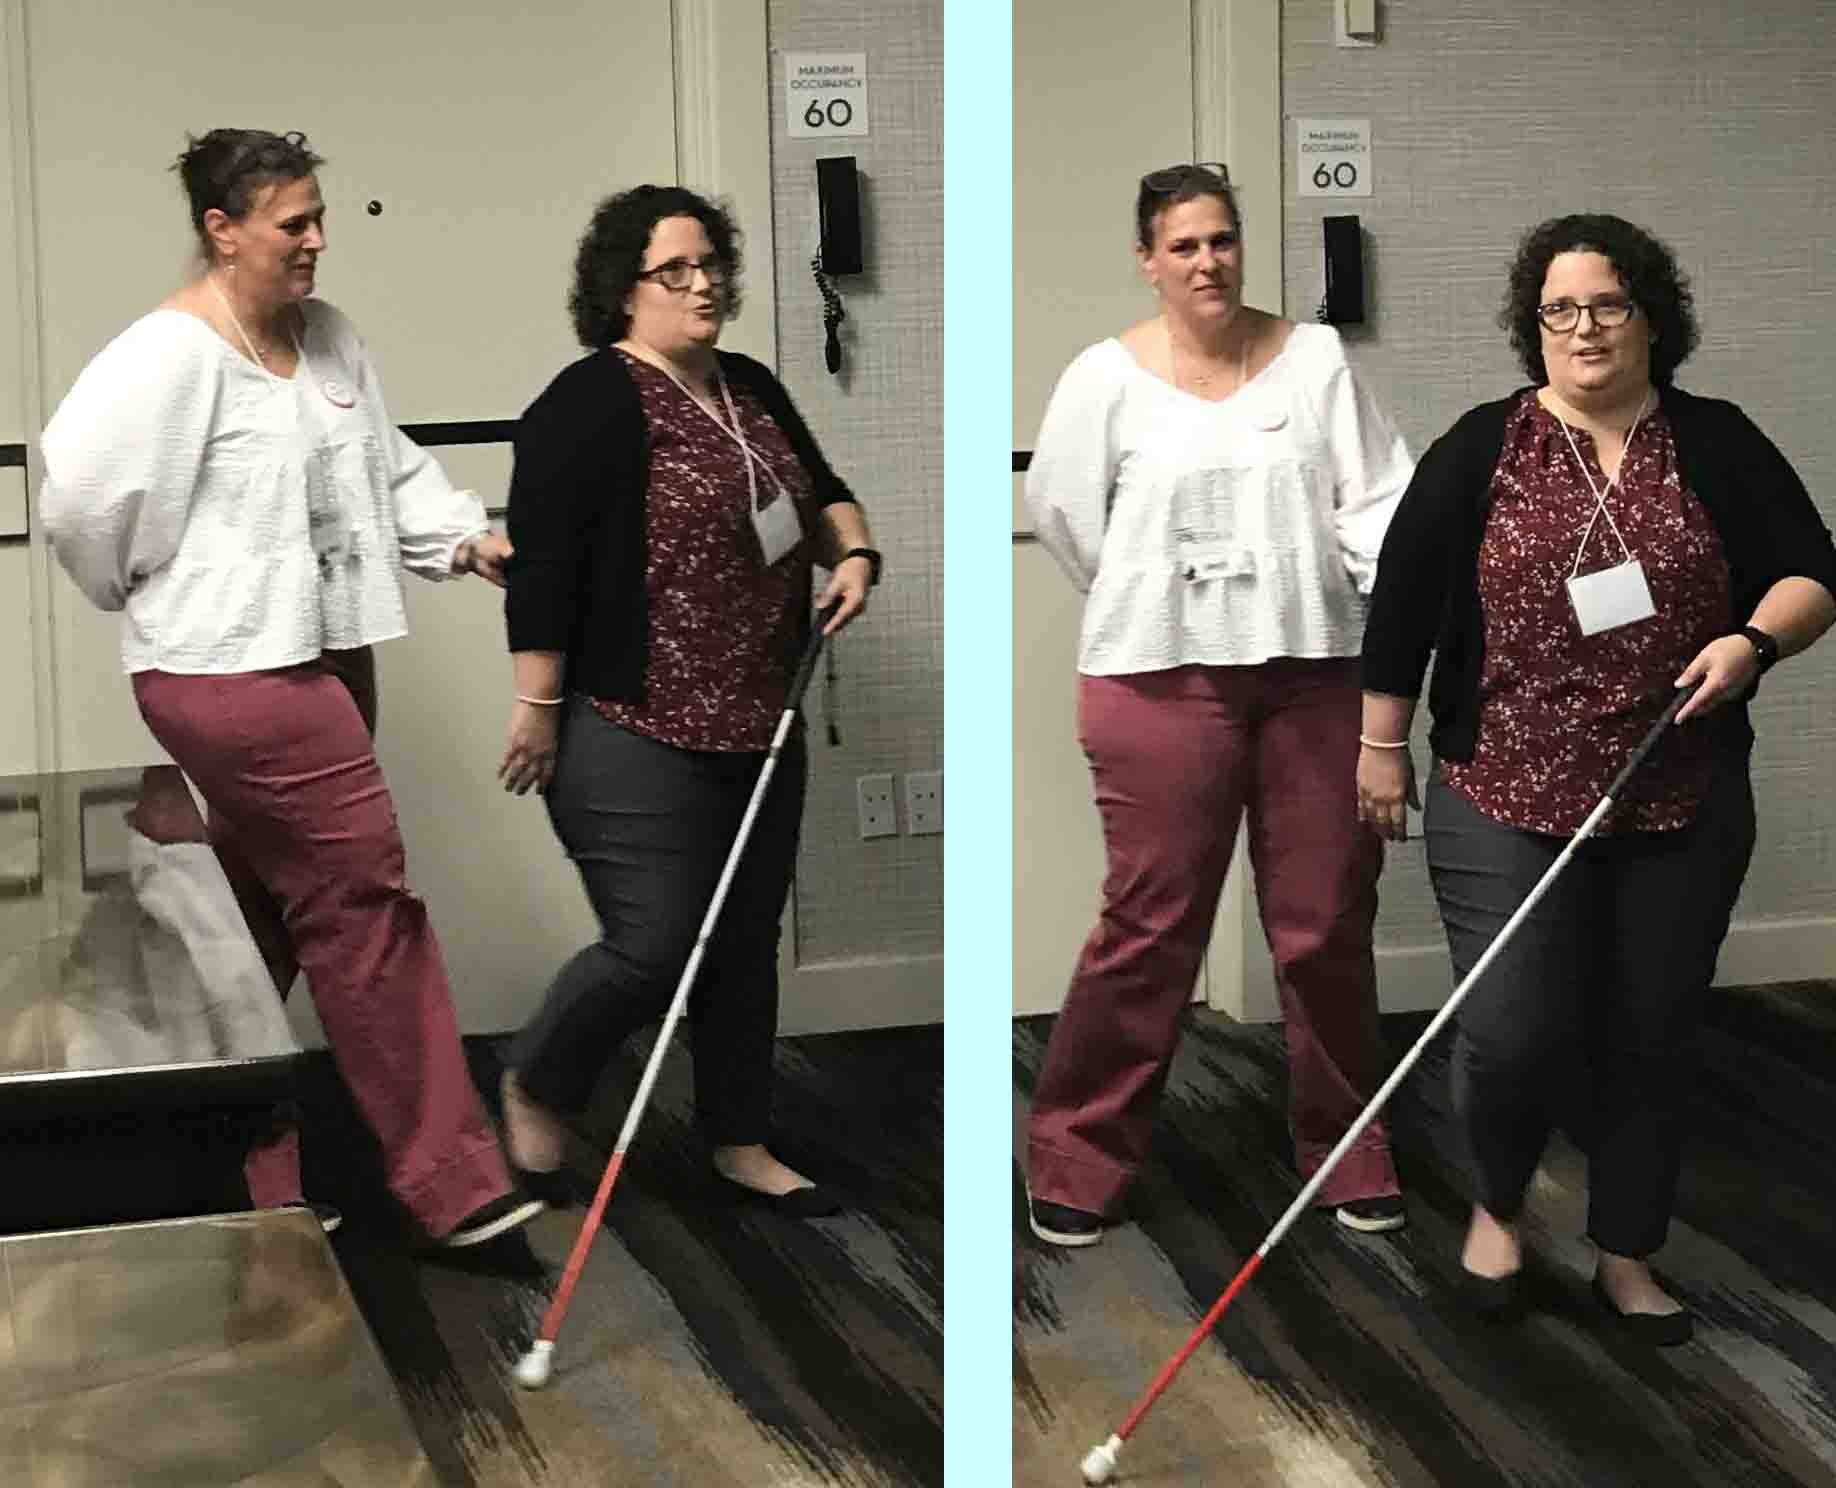 Pictures show Elaine guiding Erica through a narrow aisle beside a table, and then turning into open space.  Elaine is using a cane and the tip of her cane reaches to the left far enough to be in front of Erika.